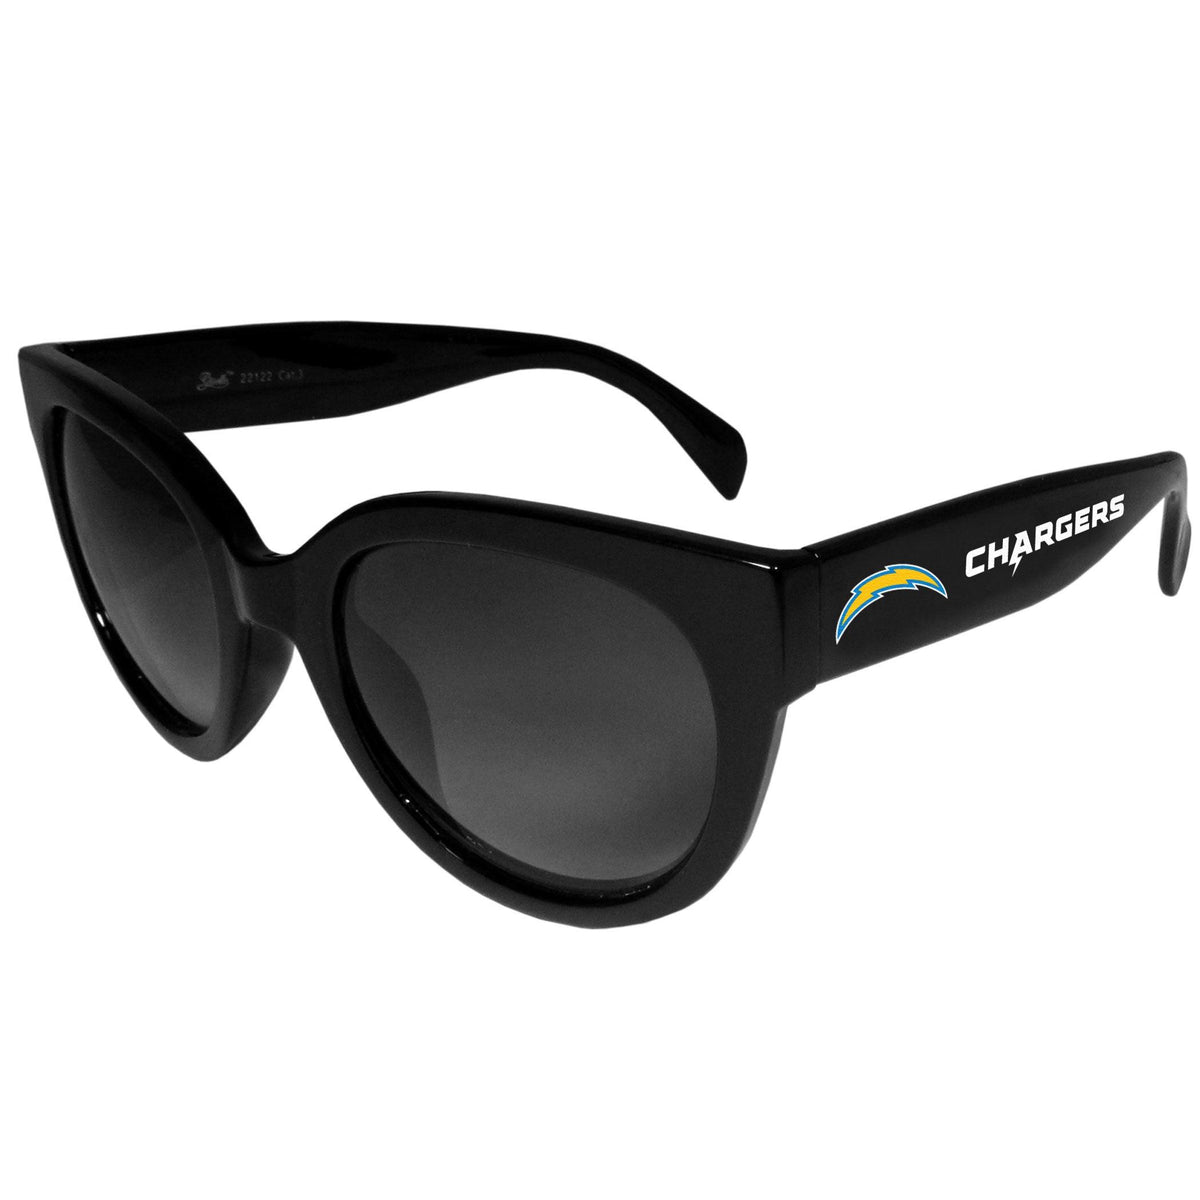 Los Angeles Chargers Women's Sunglasses - Flyclothing LLC